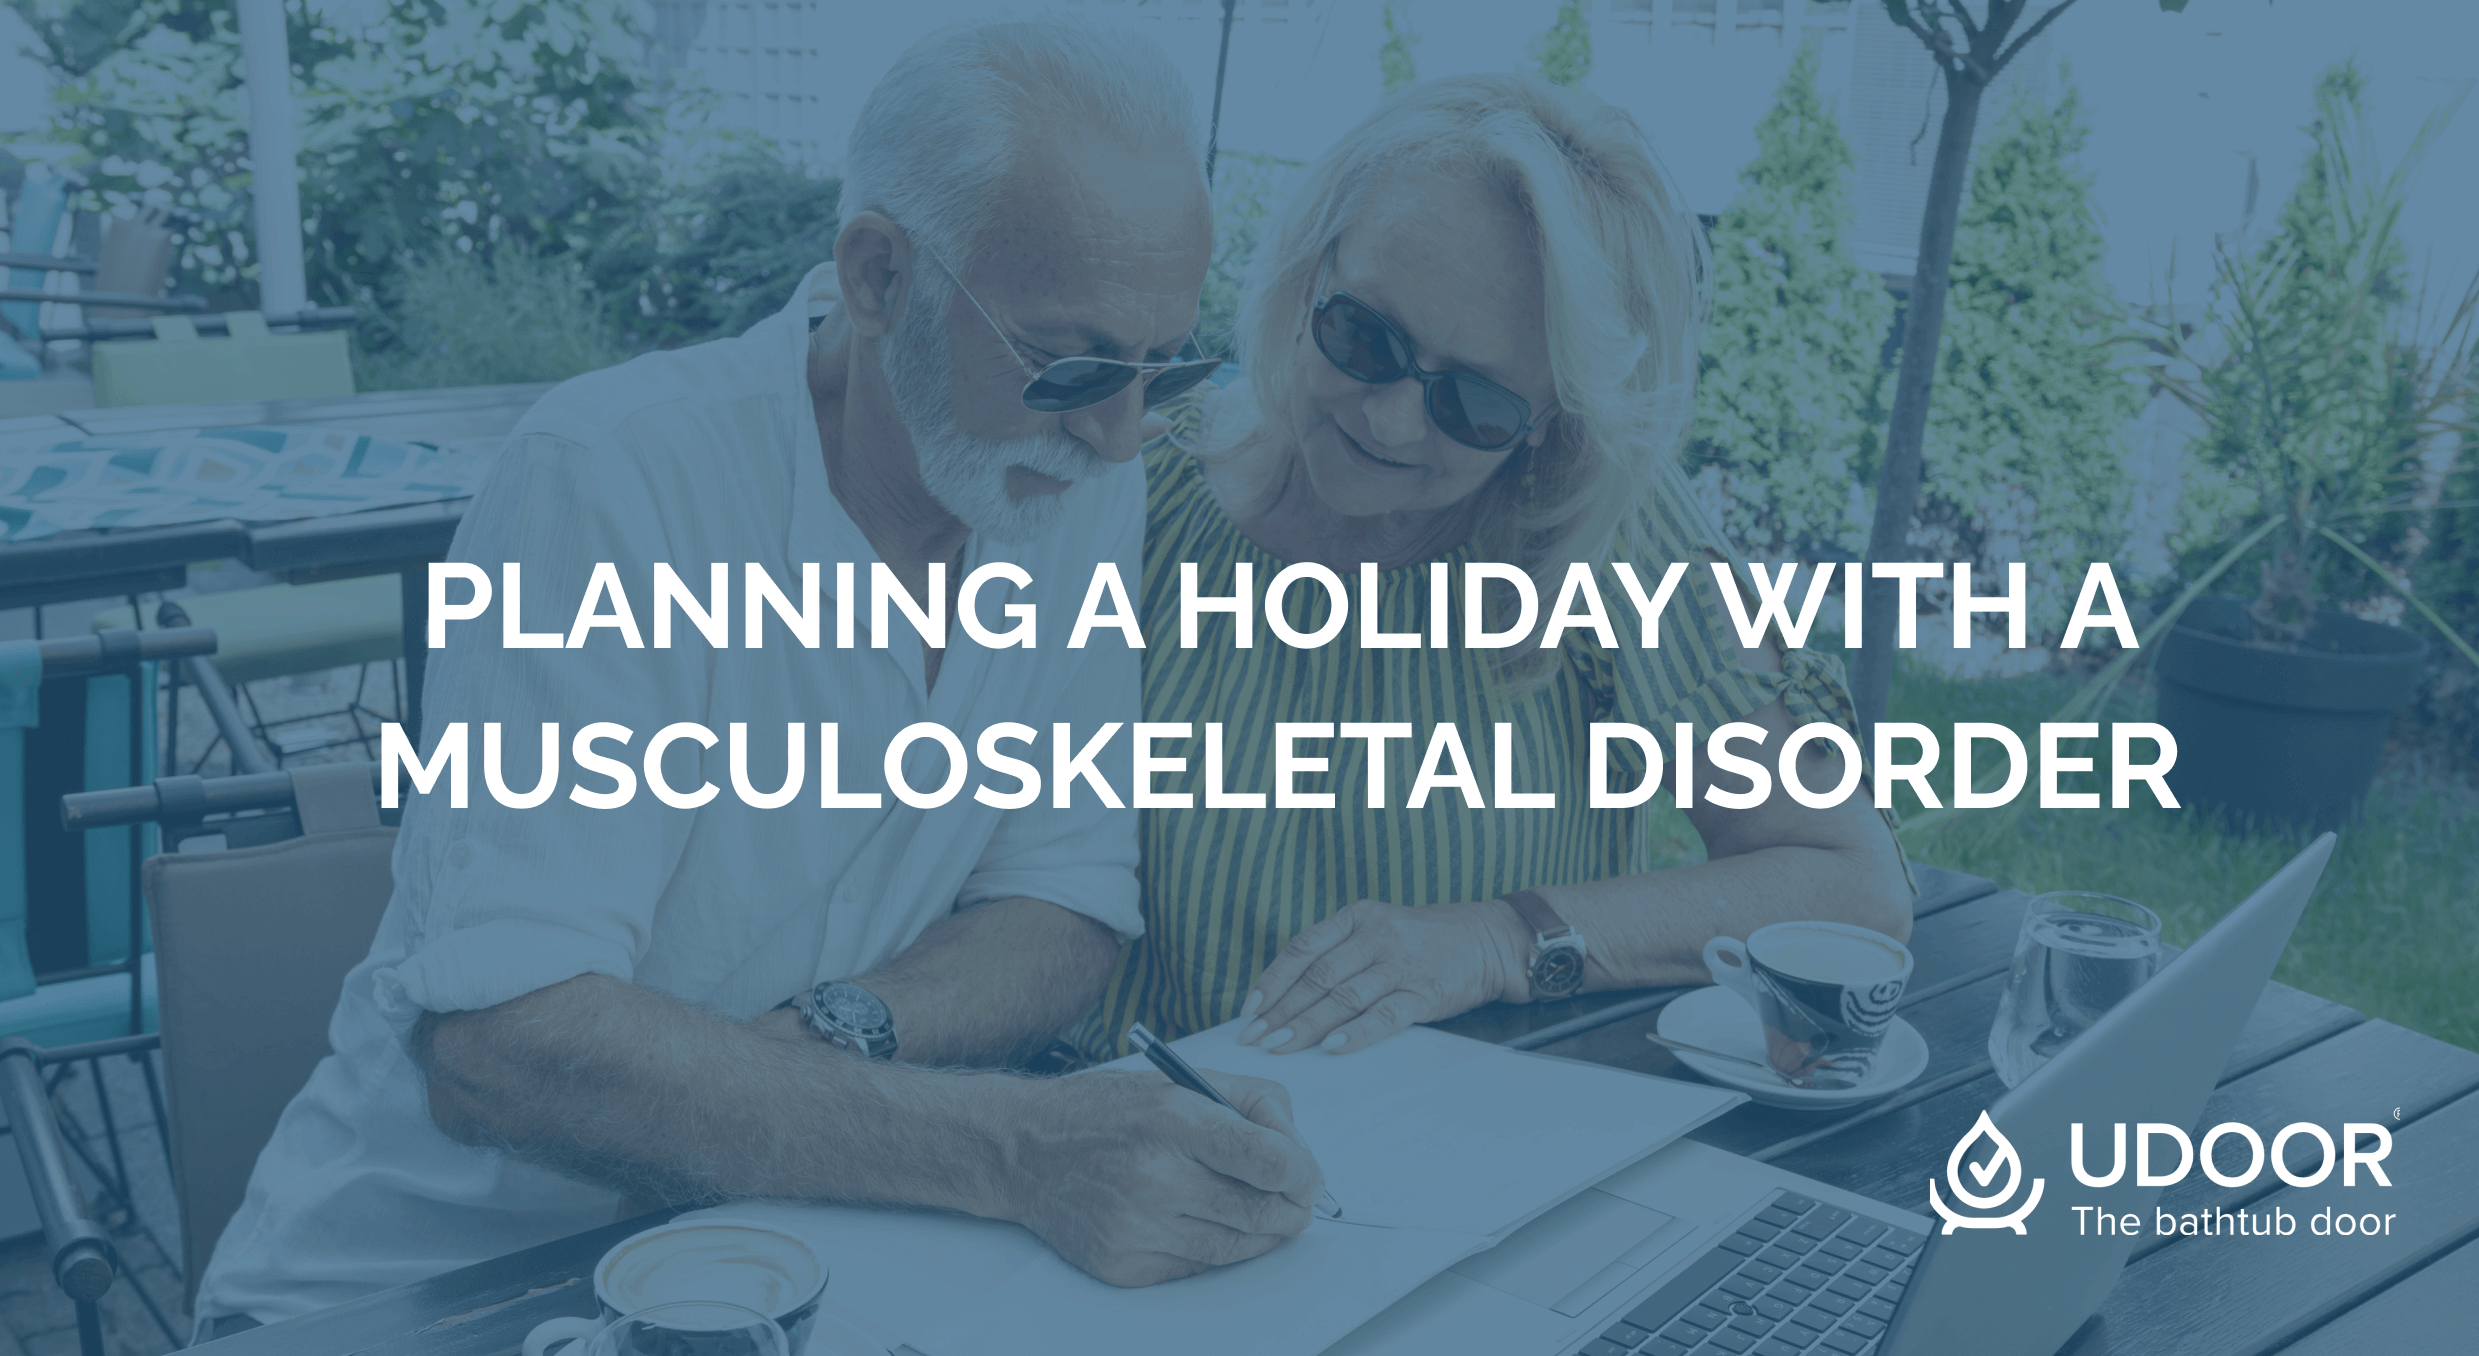 UDOOR UK Planning a holiday with a muscoskeletal disorder